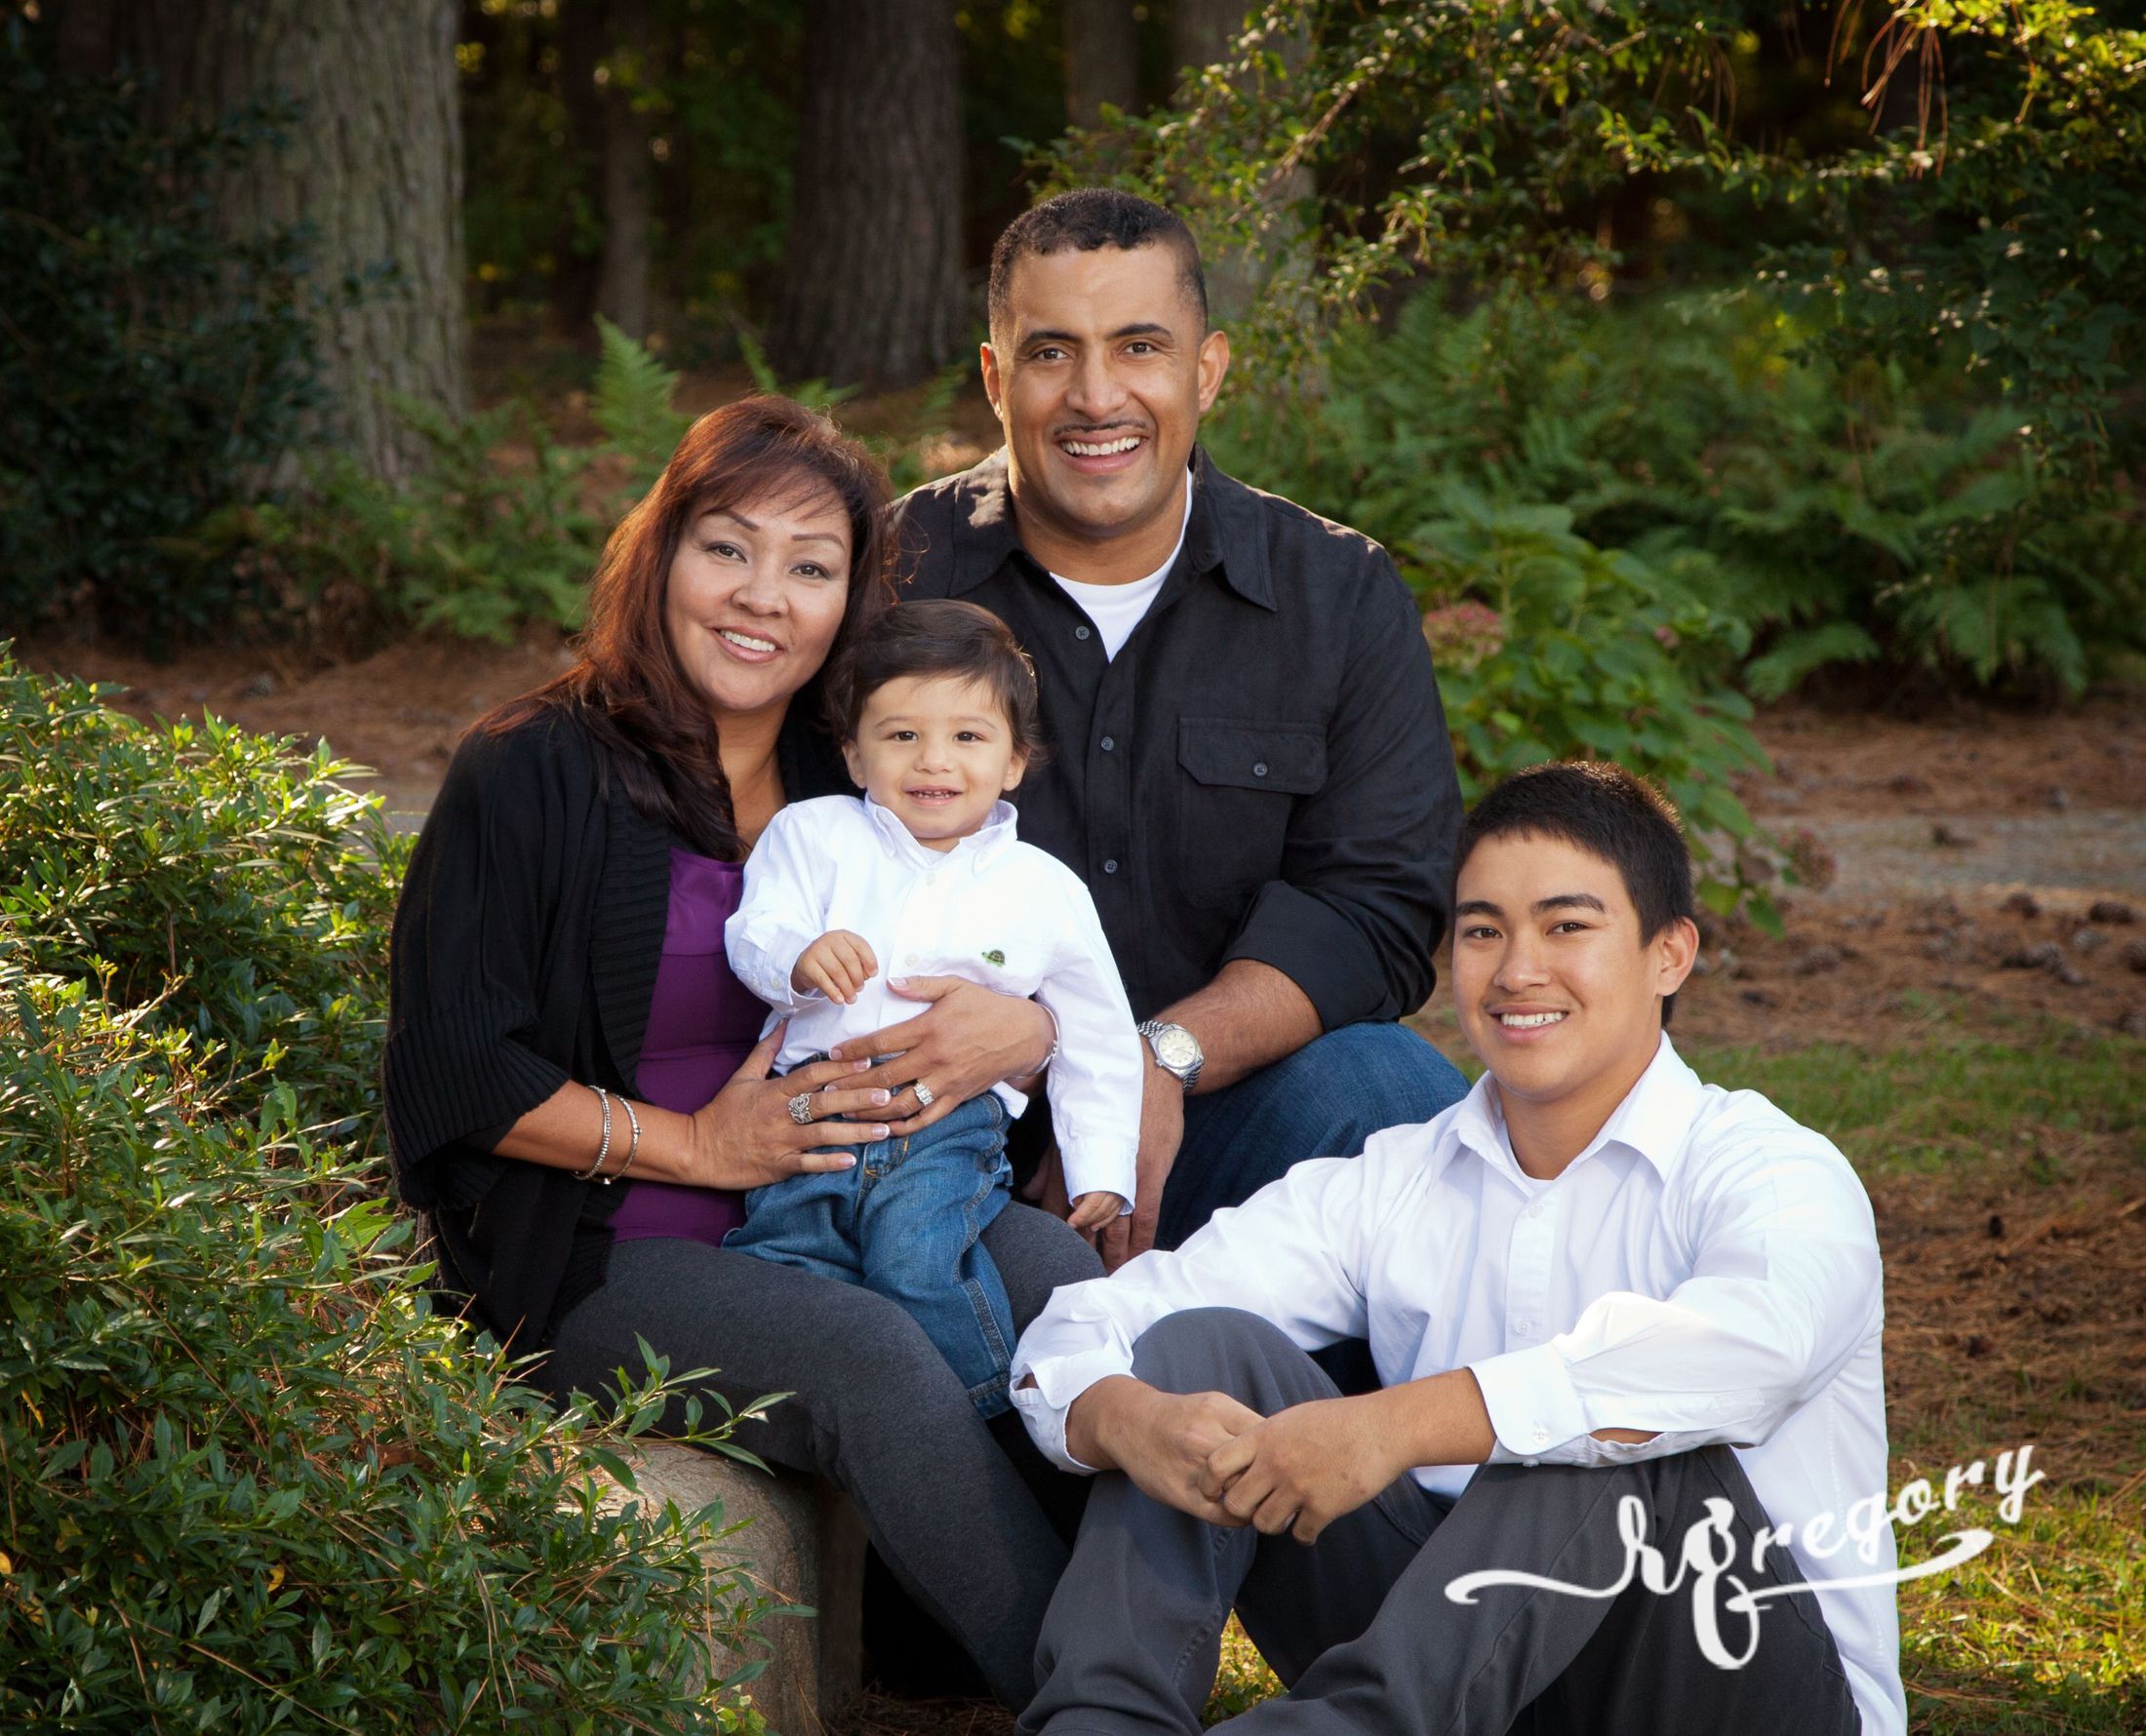 Lopez outdoor family photography